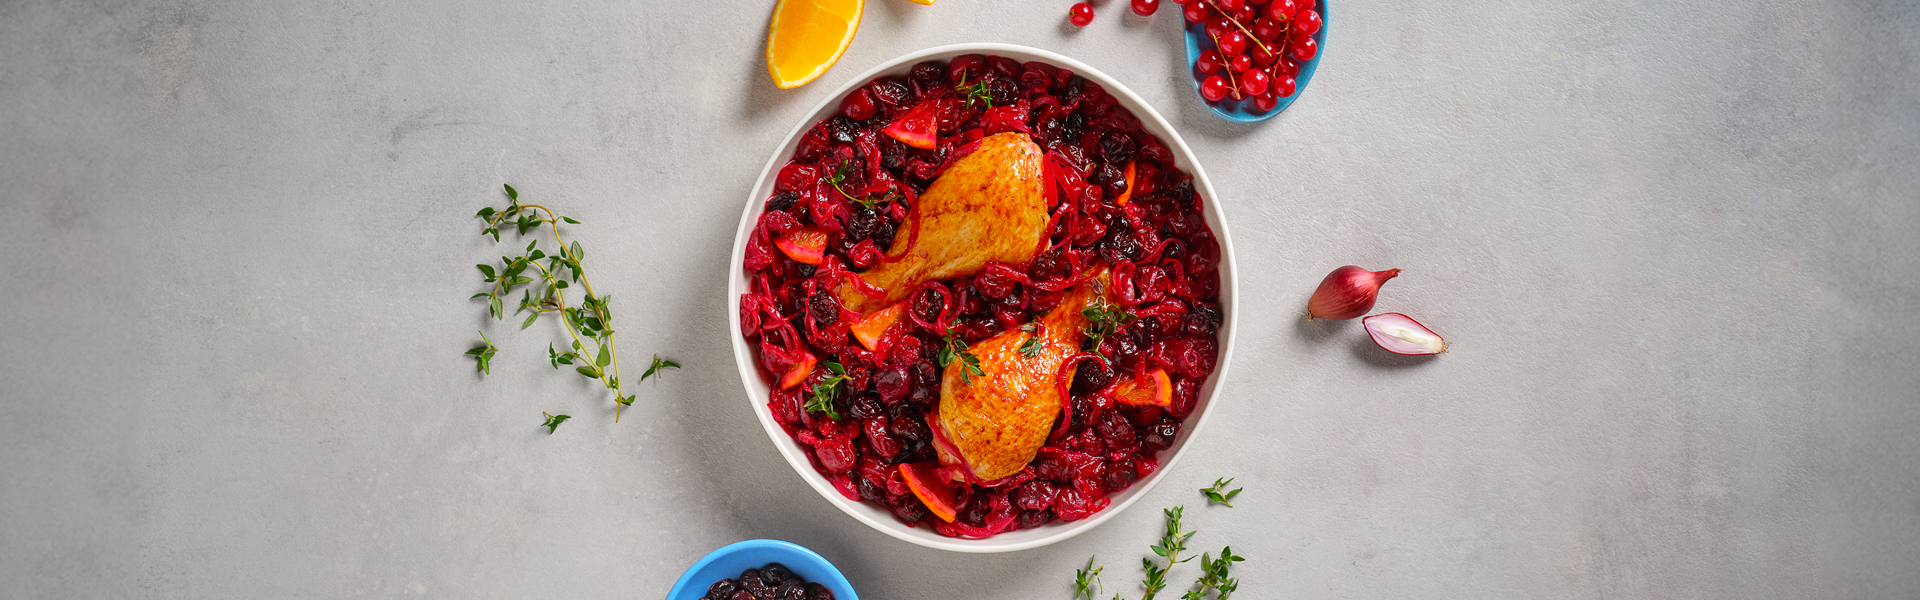 Tangy Vinegar Chicken with Cranberries and Orange